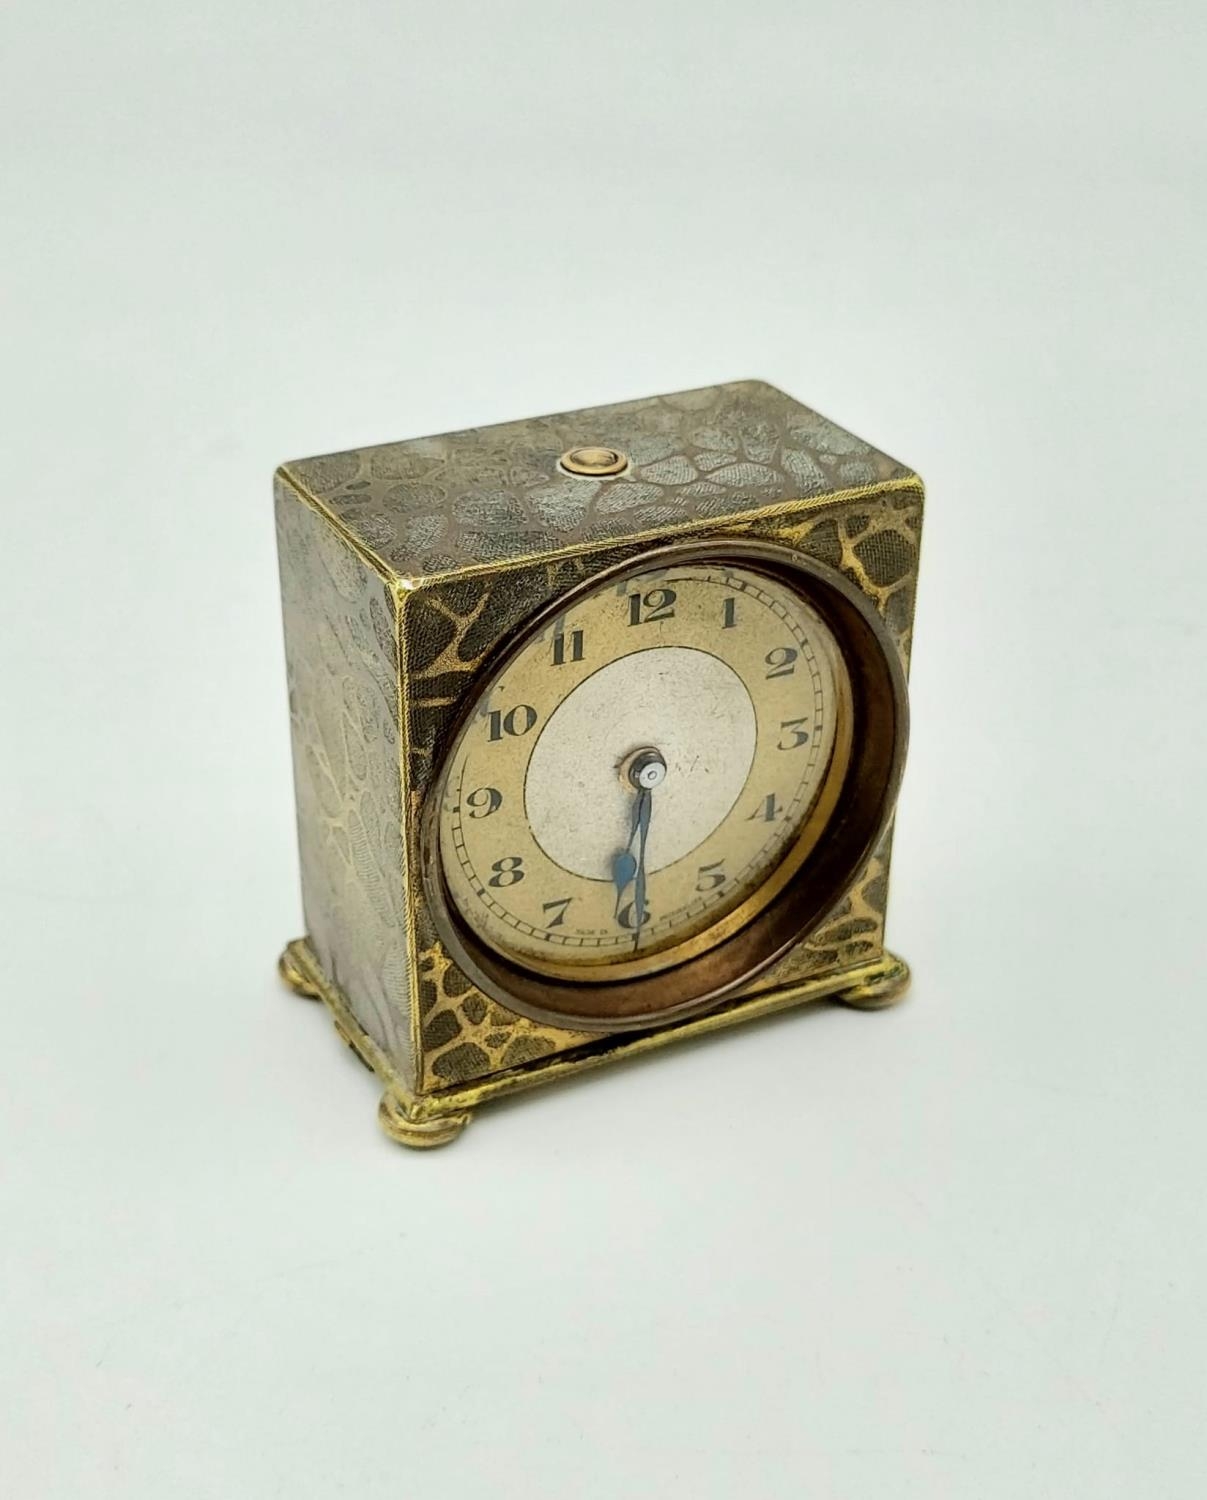 An Early French Travel Alarm Clock - Patented. In a rockery pattern. 5 x 5cm. In working order. - Image 2 of 8